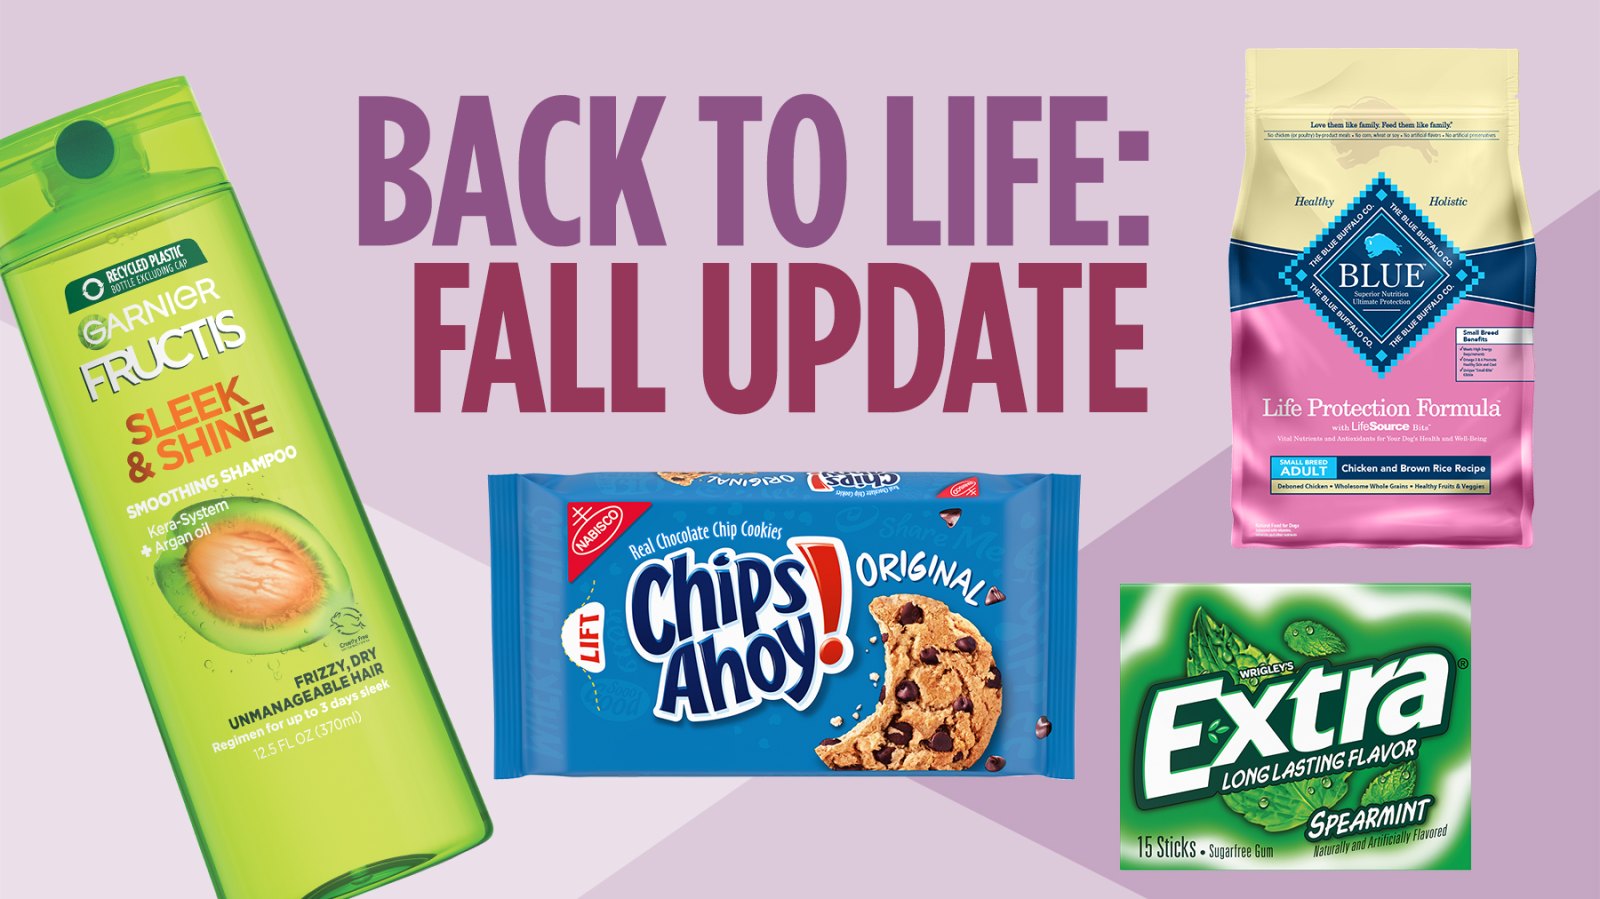 New Feature Image for Albertsons September